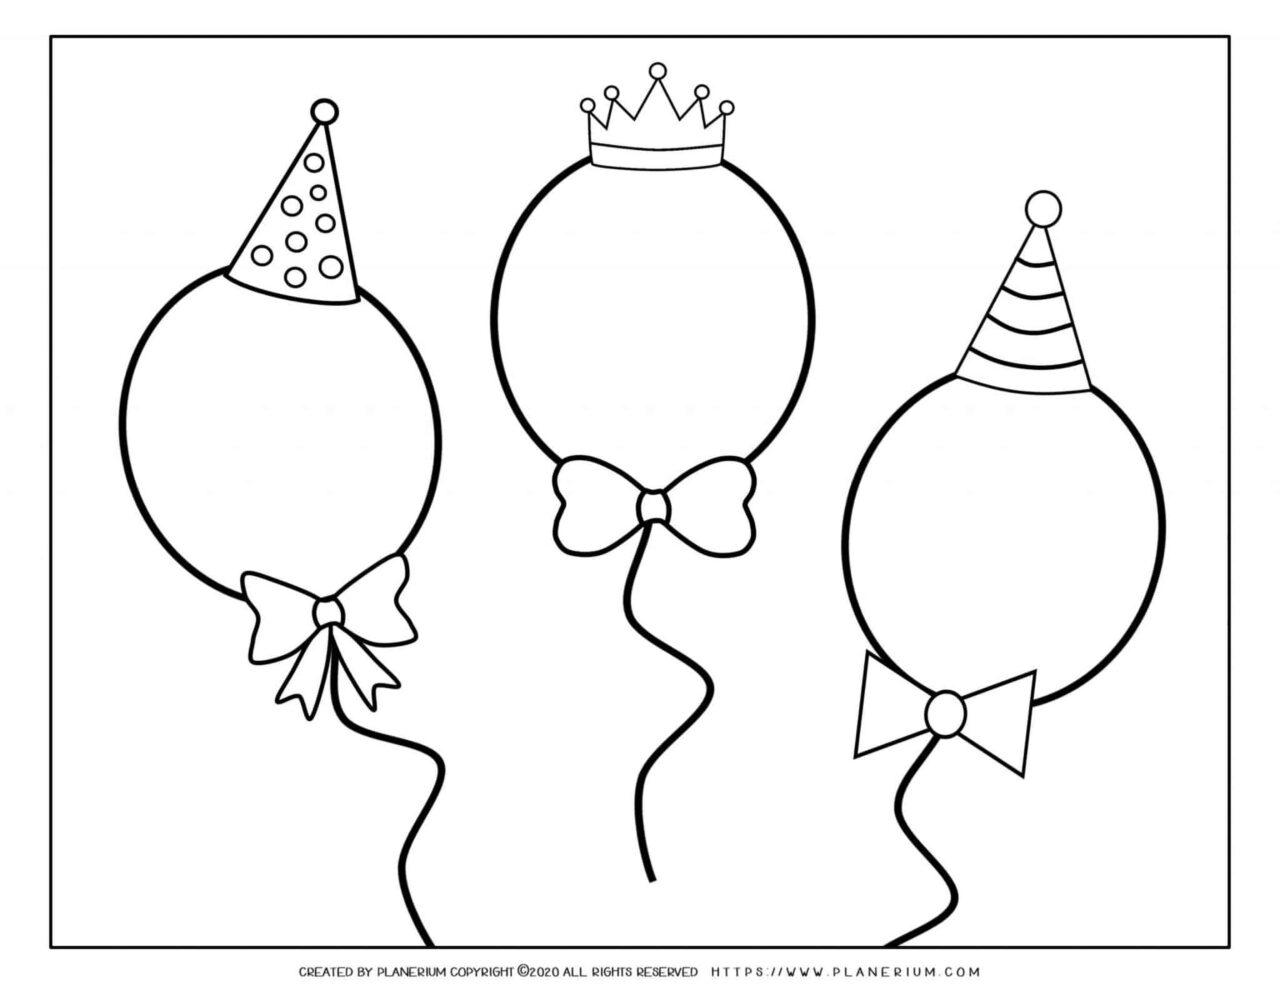 Carnival - Coloring Page Worksheet - Balloons | Planerium